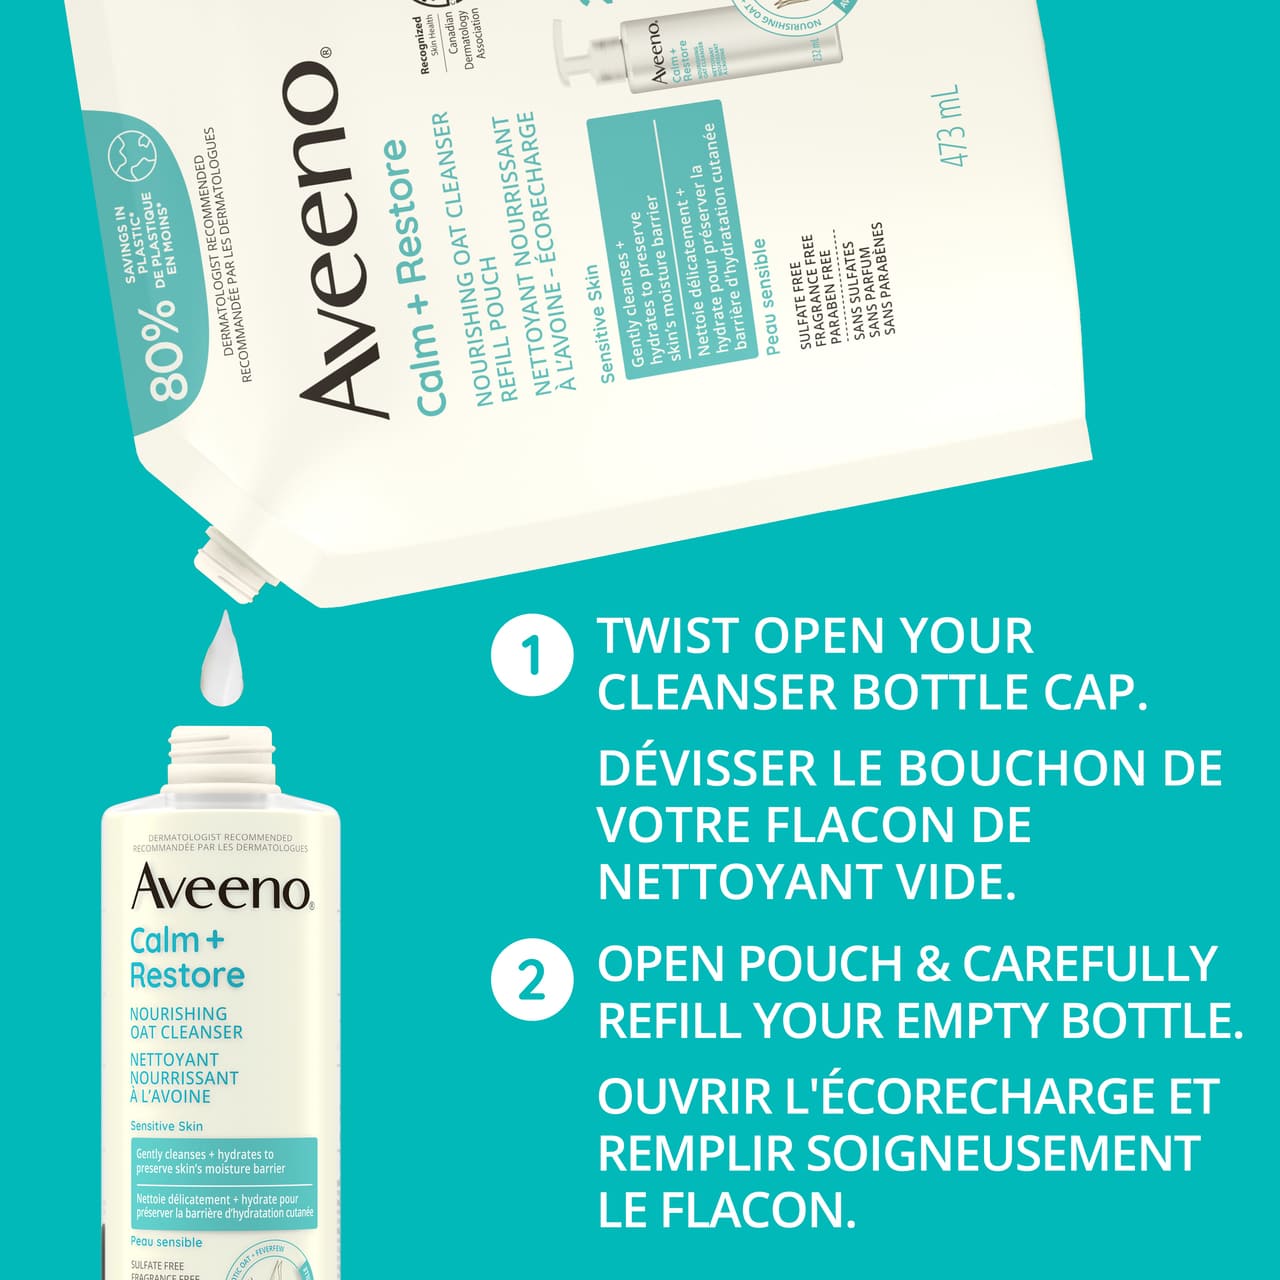 Aveeno Calm + Restore Cleanser Refill Pouch with text '1-Twist open the cleanser bottle cap, 2- open pouch & refill the empty bottle.'